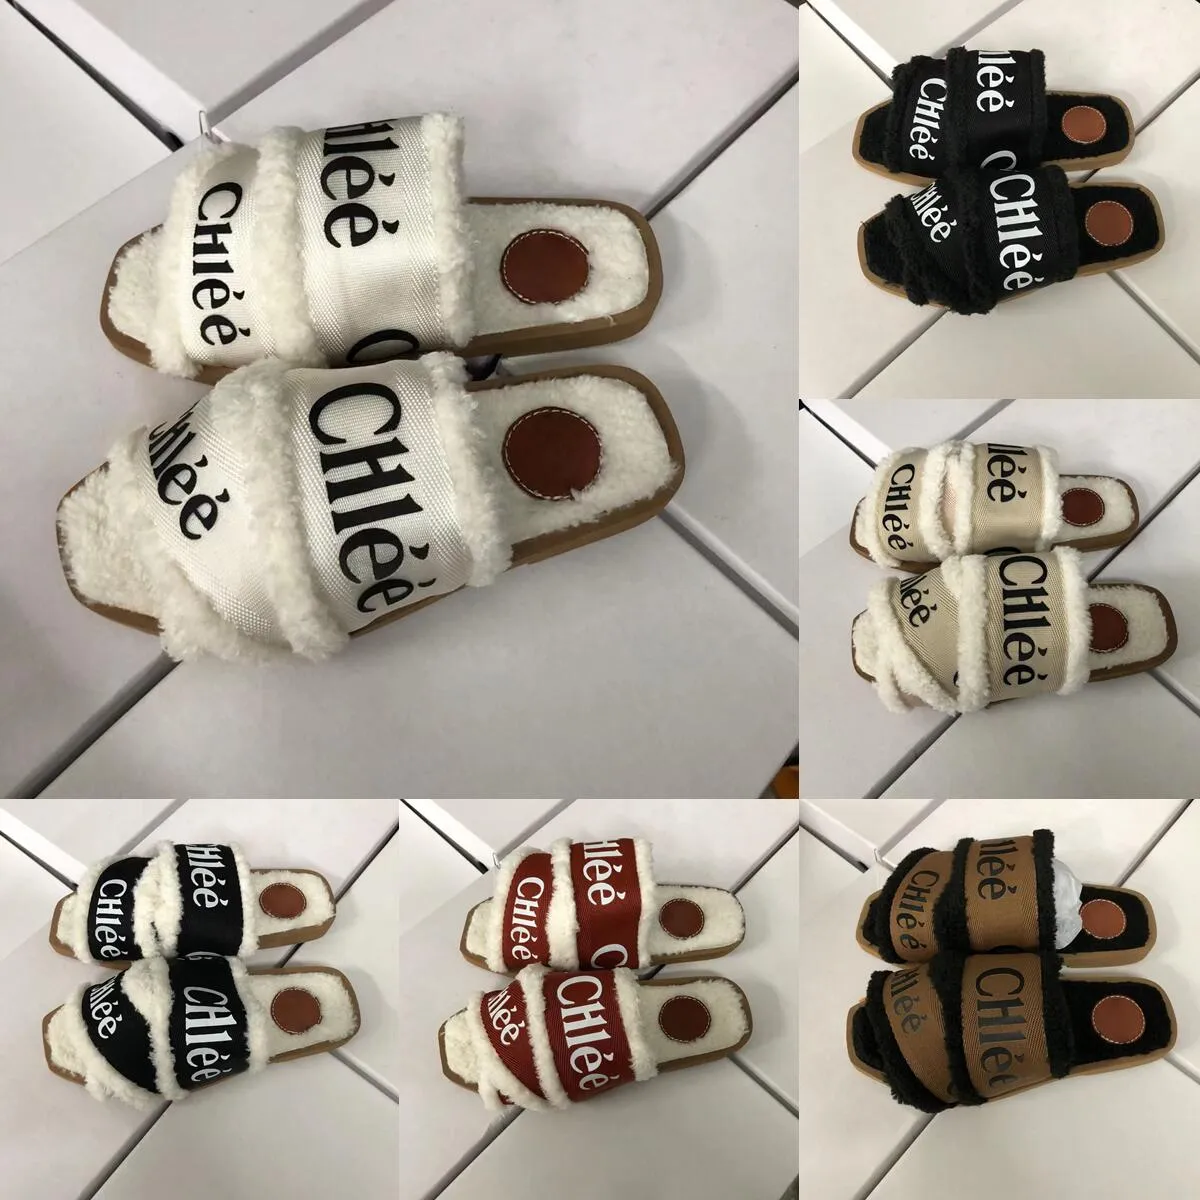 Plush White Beach Canvas Slippers Sandals Designer Winter Booties Lettering Fabric Women Shoes Size Eur 36-42 5